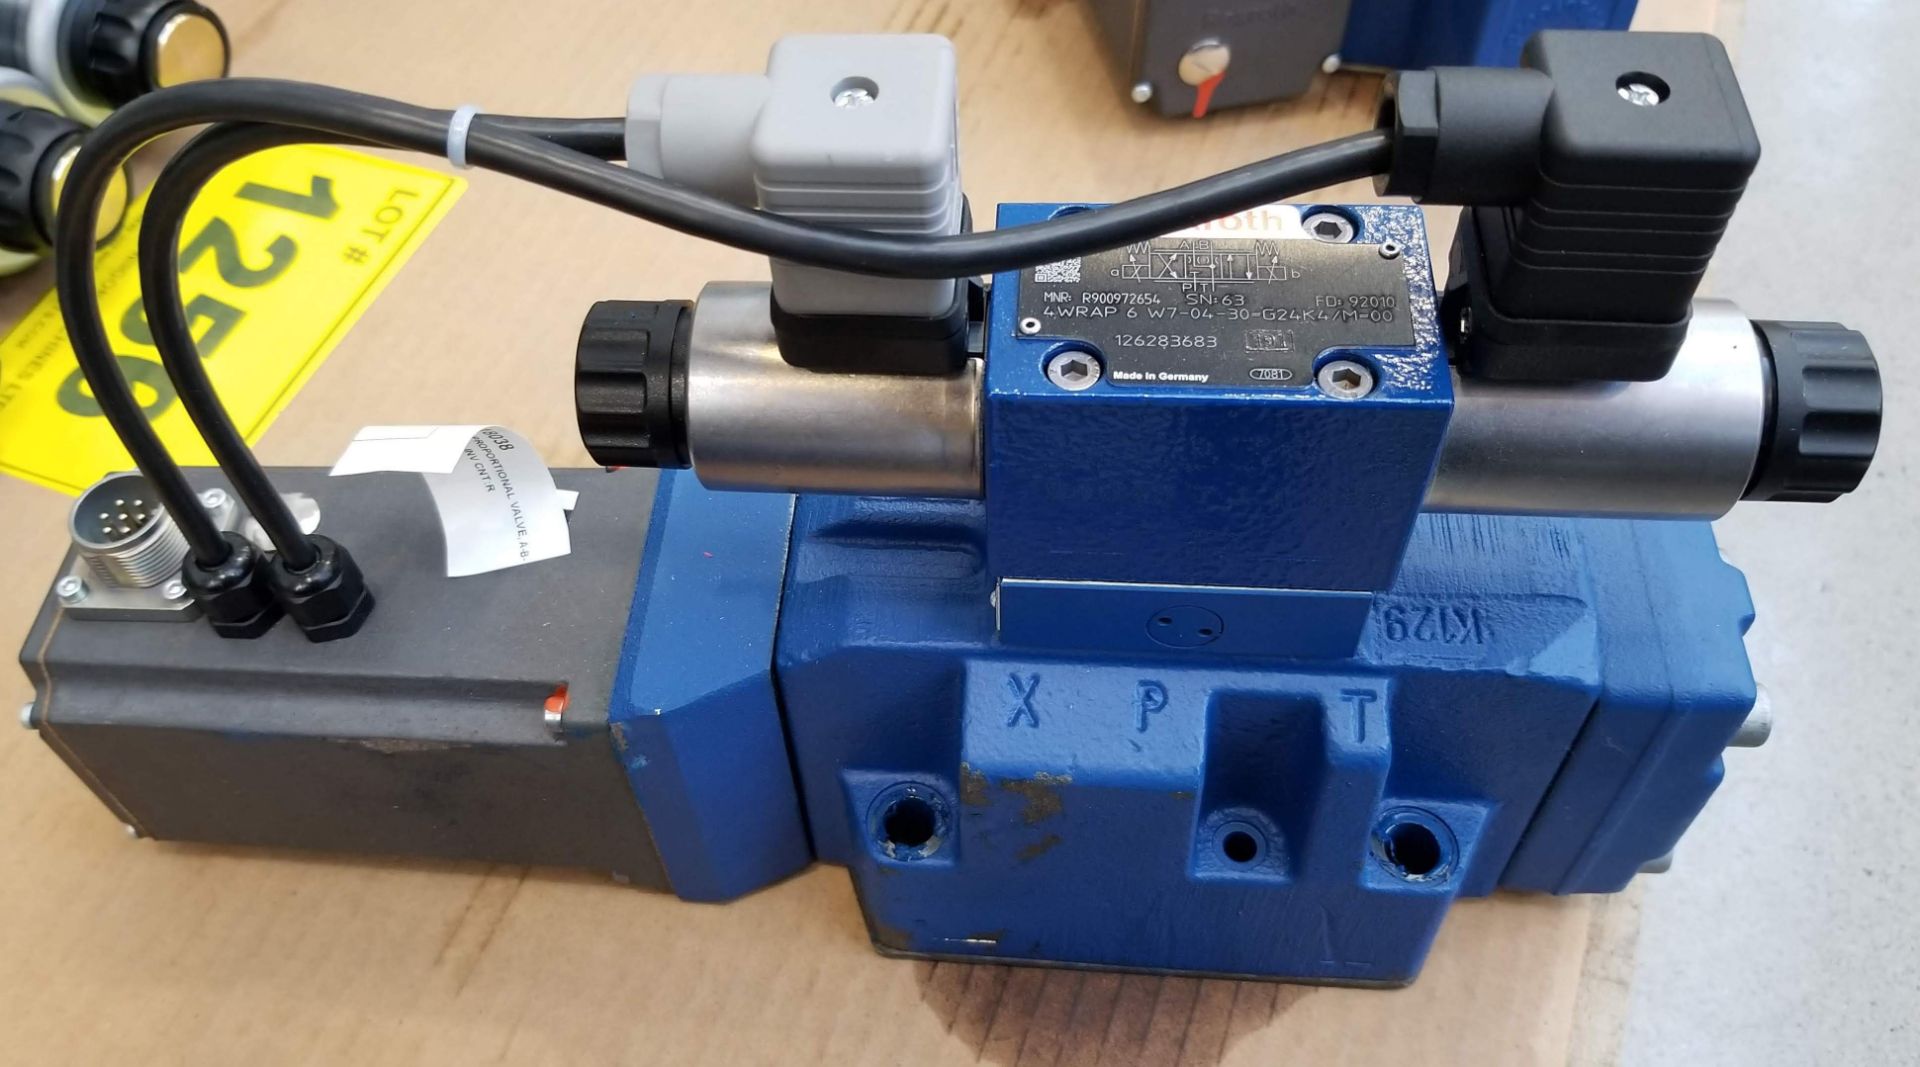 BOSCH REXROTH NG16 PROPORTIONAL VALVE, A-B-T, W/ POS F/B - Image 7 of 9